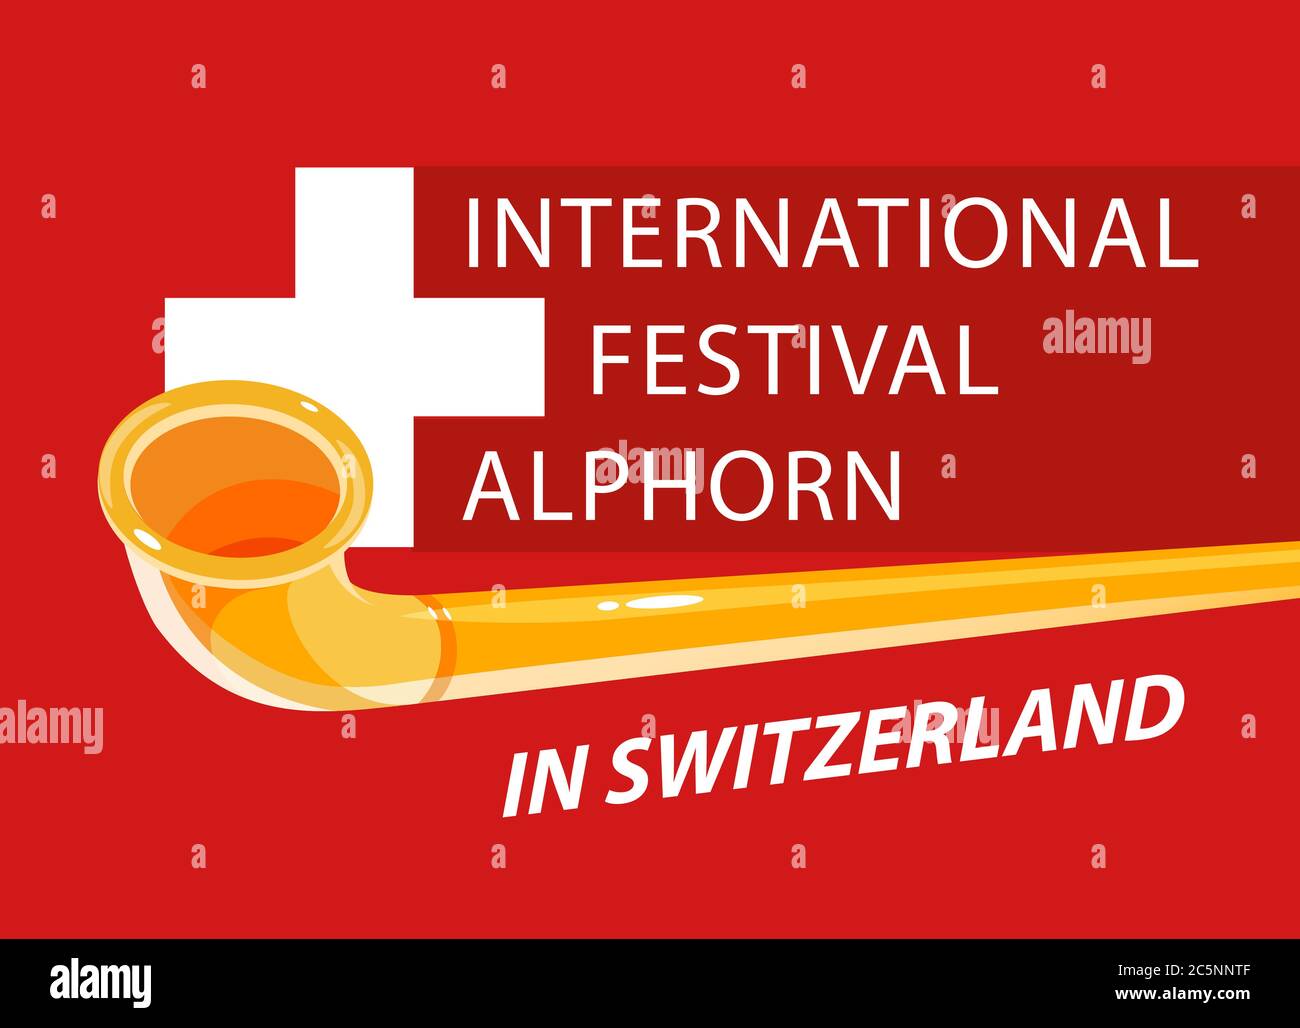 Alphorn international festival in Switzerland, Vector invitation banner template for web site with title and neutral red background. Stock Vector